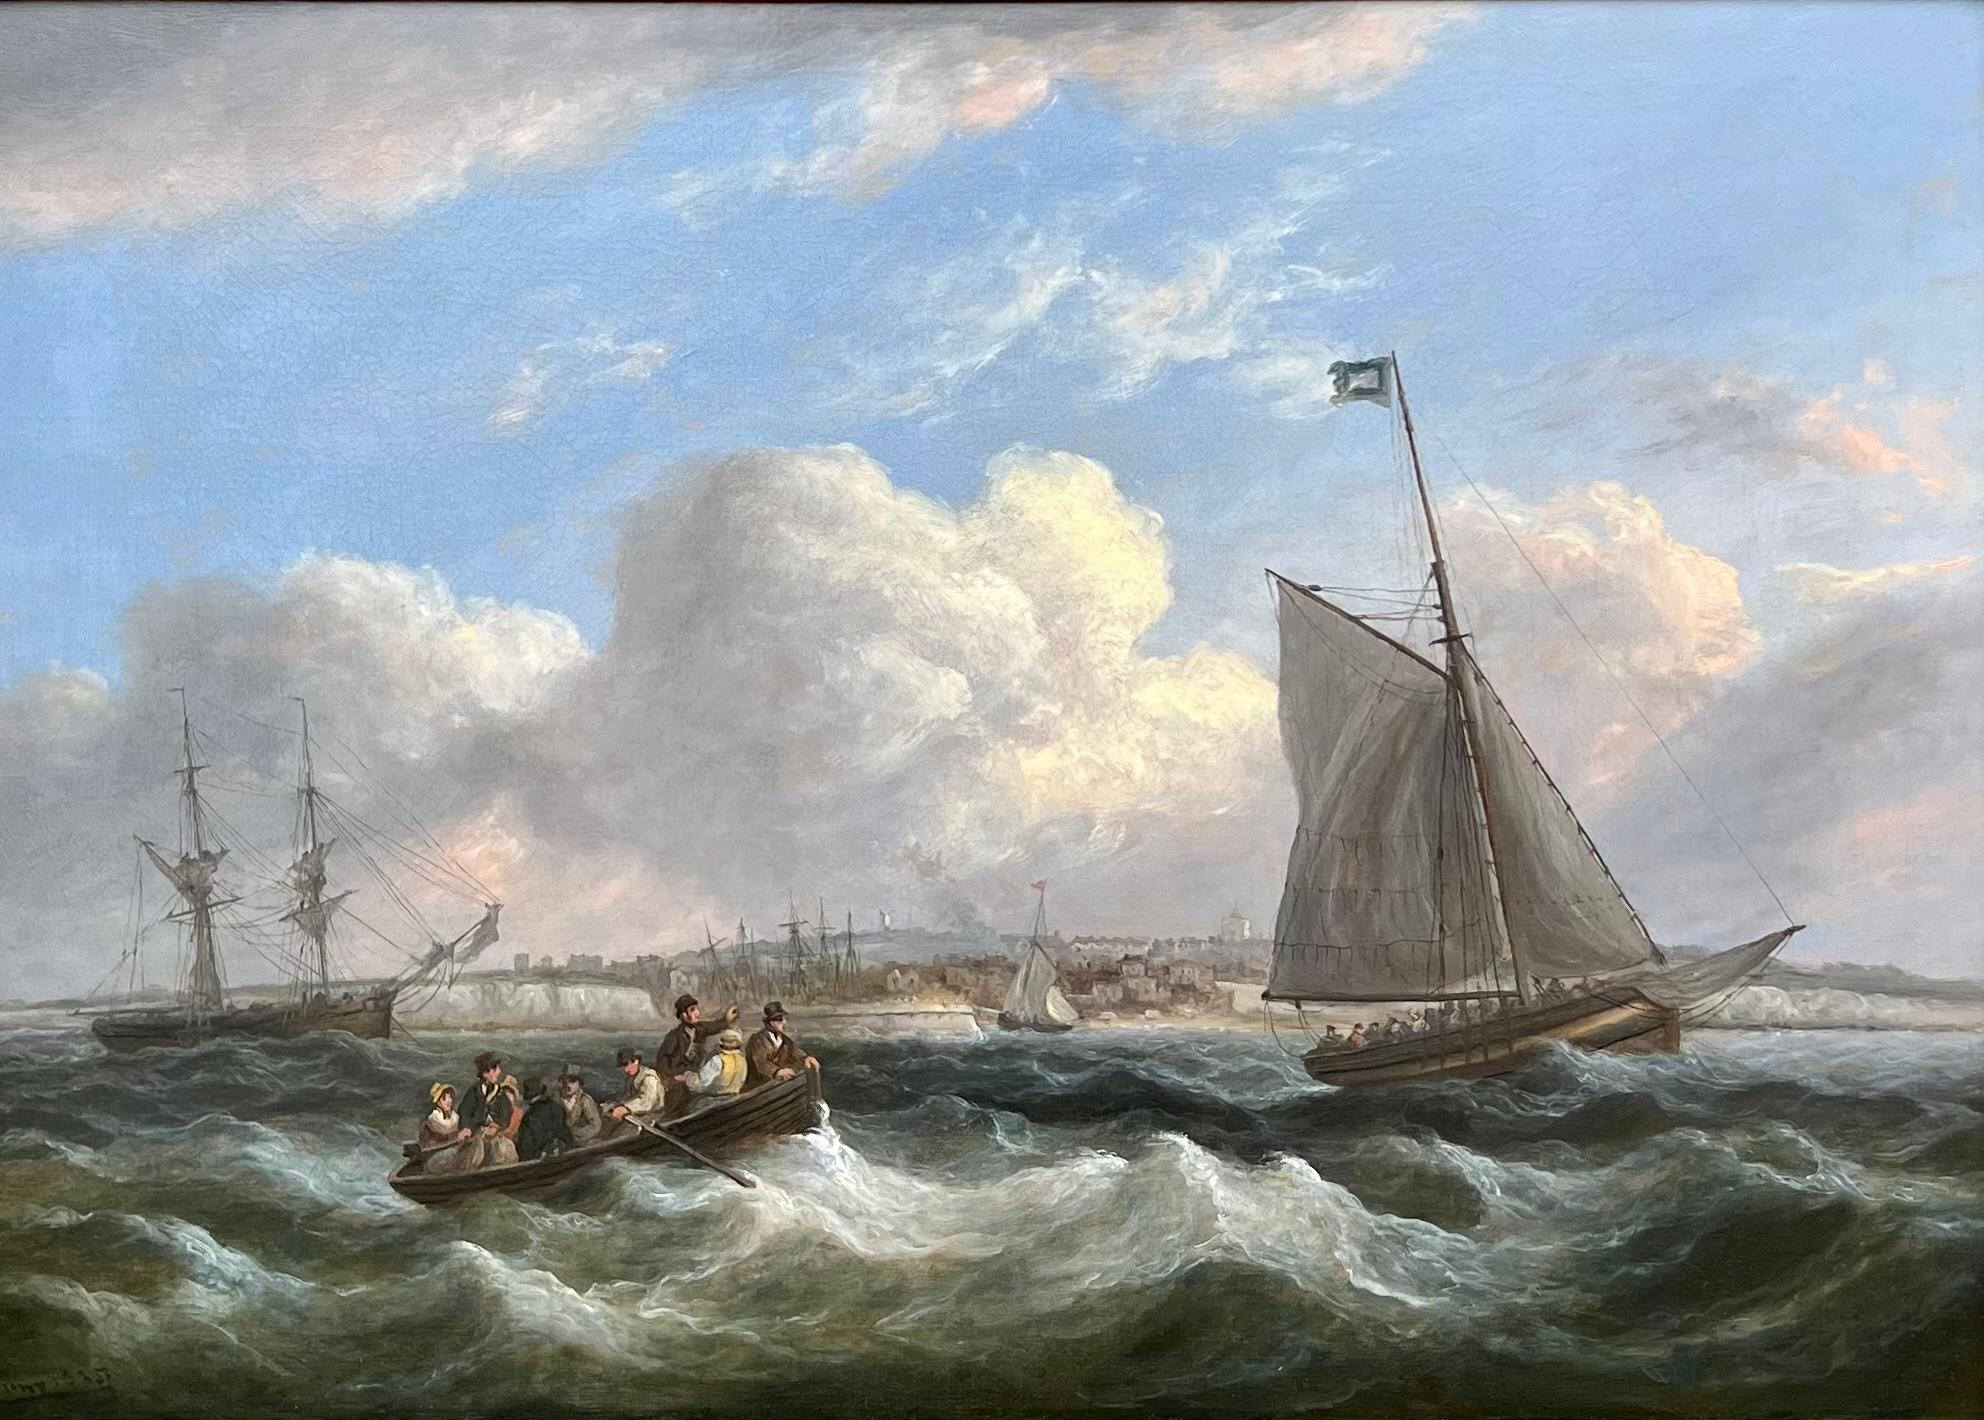 Shipping Off the Coast - Painting by Thomas Luny